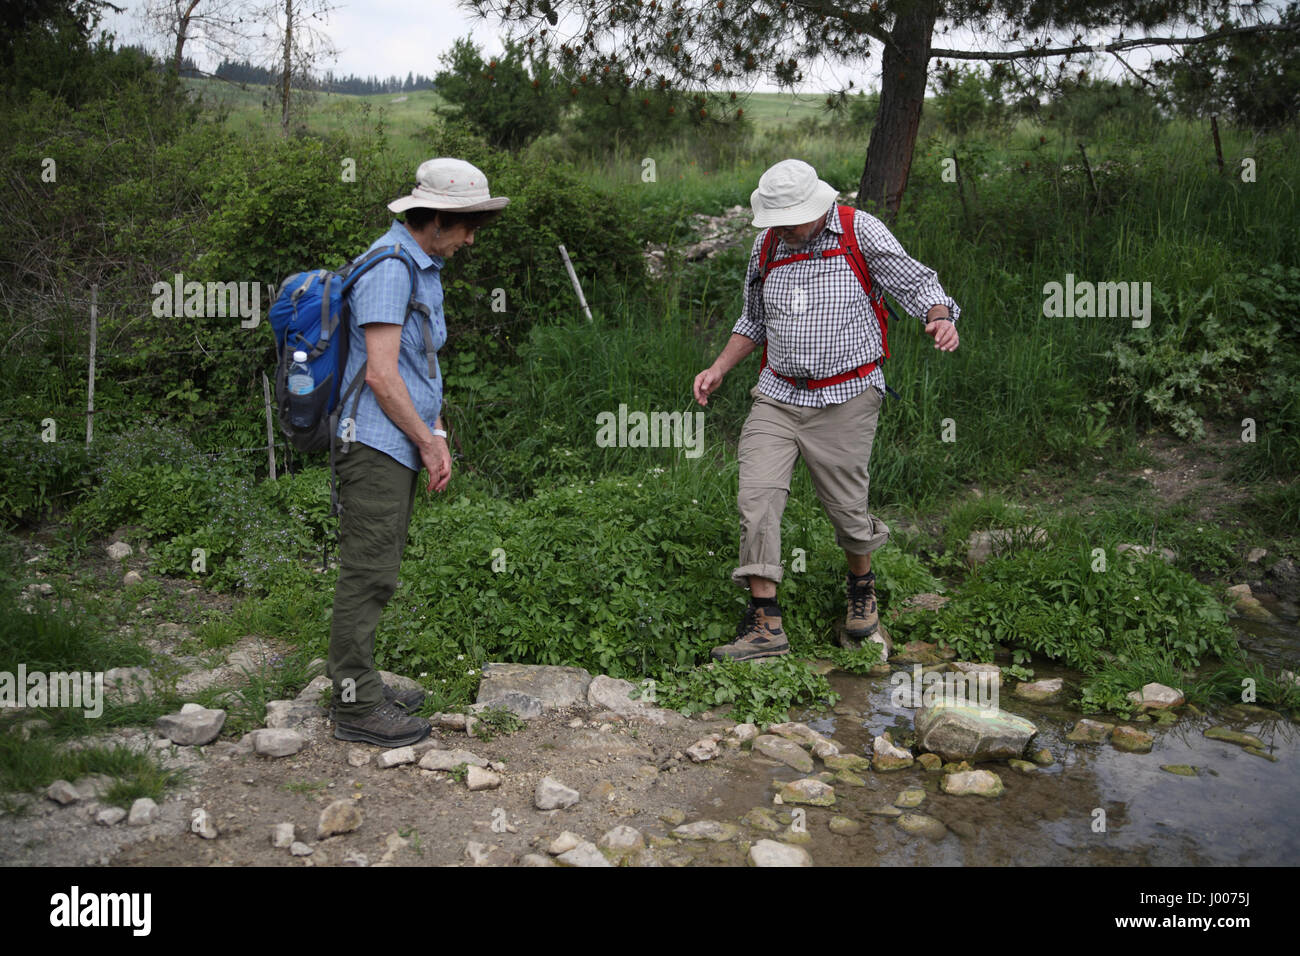 A 72 year old man hiker walks on pebbles keeping his balance carefully crossing a stream, his 61 year old woman friend watches he is fine and safe. Stock Photo